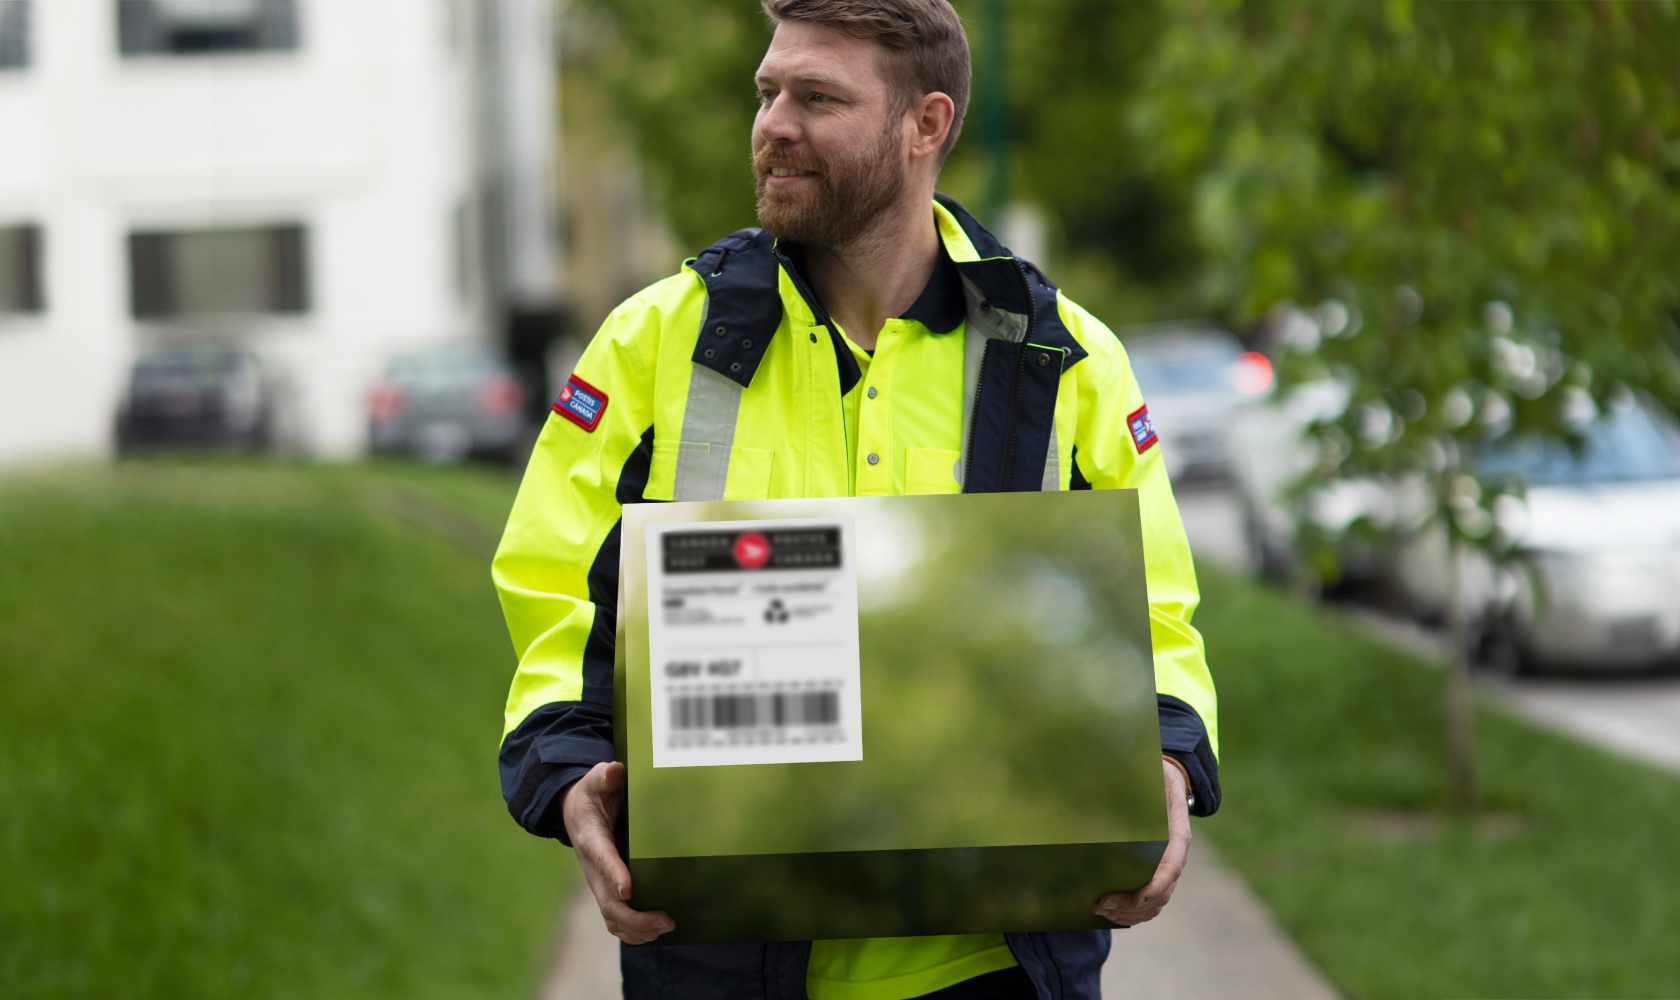 A Canada Post employee carries a carbon-neutral package for delivery.